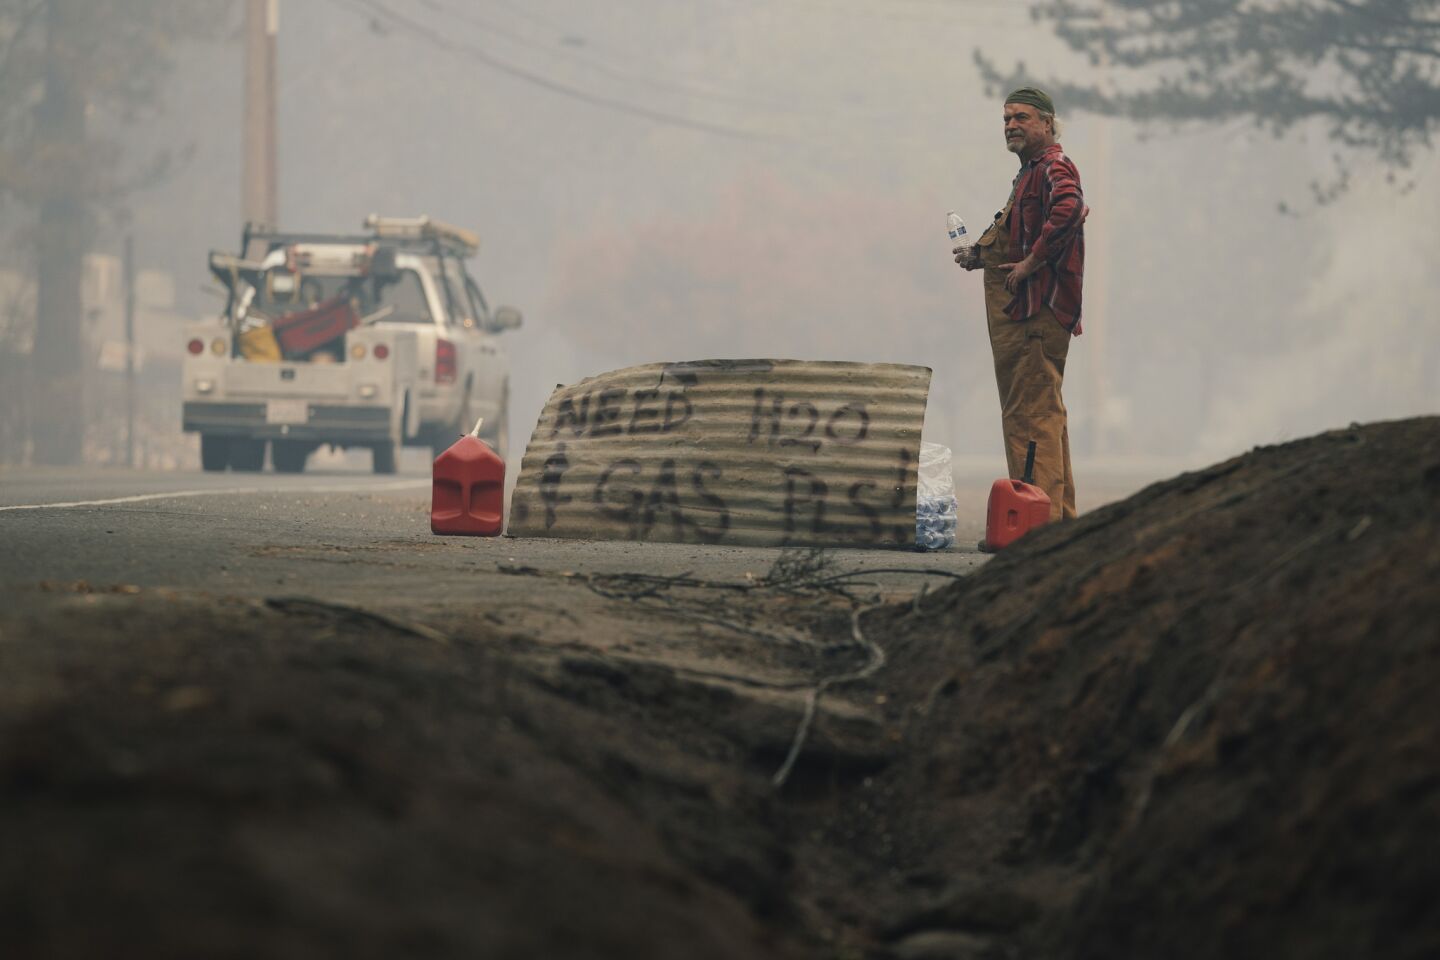 Brad Weldon, 63, waits for help along Skyway in Paradise, Calif. Weldon was among the residents who stayed and battled the wildfire.